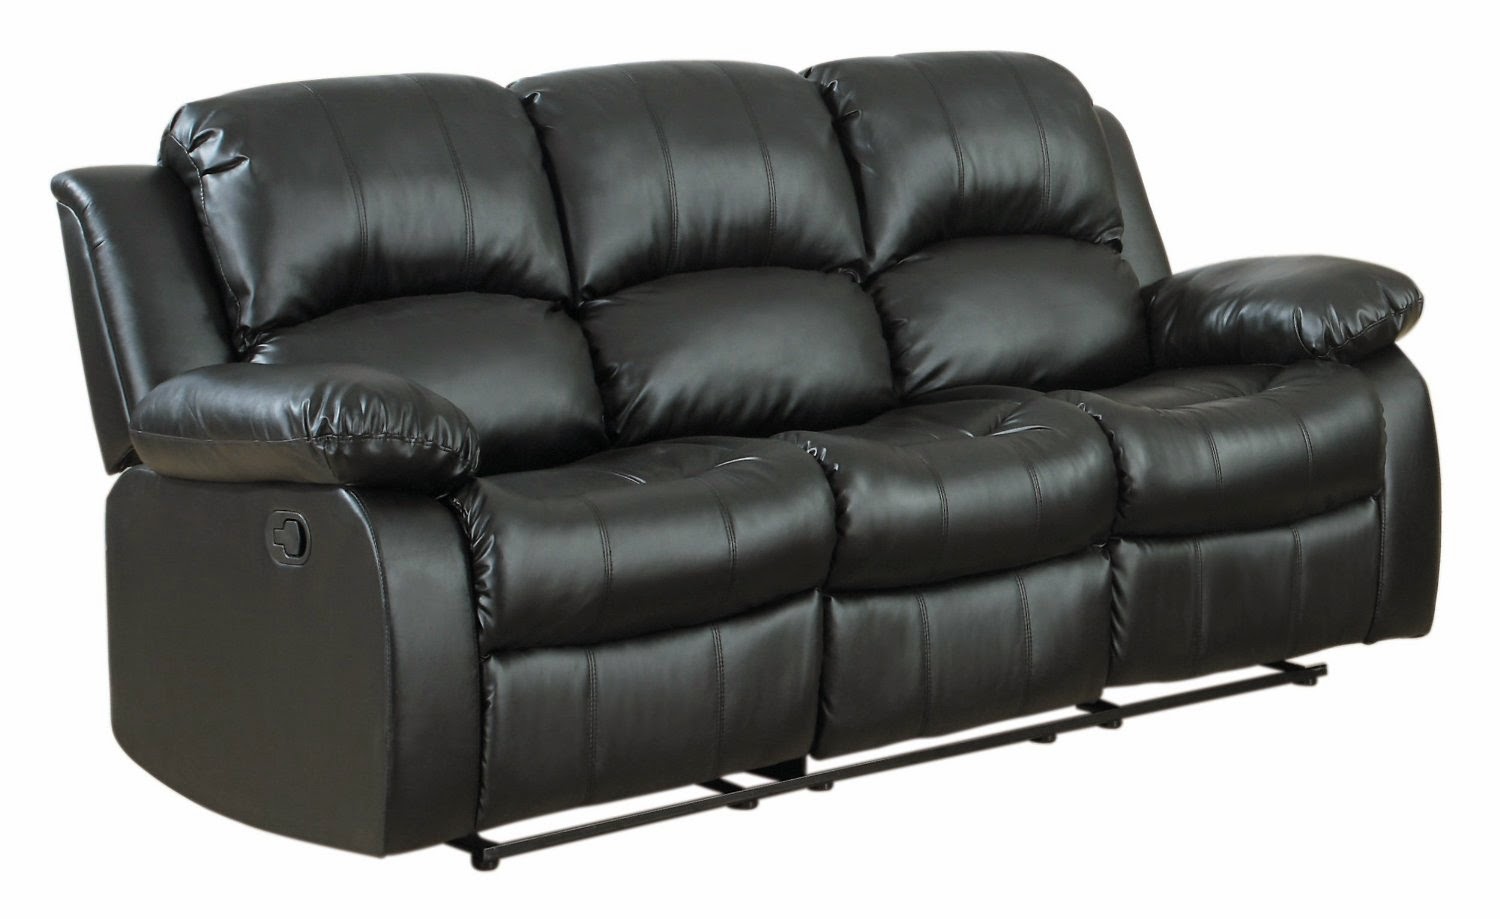 full reclining leather sofa free shipping